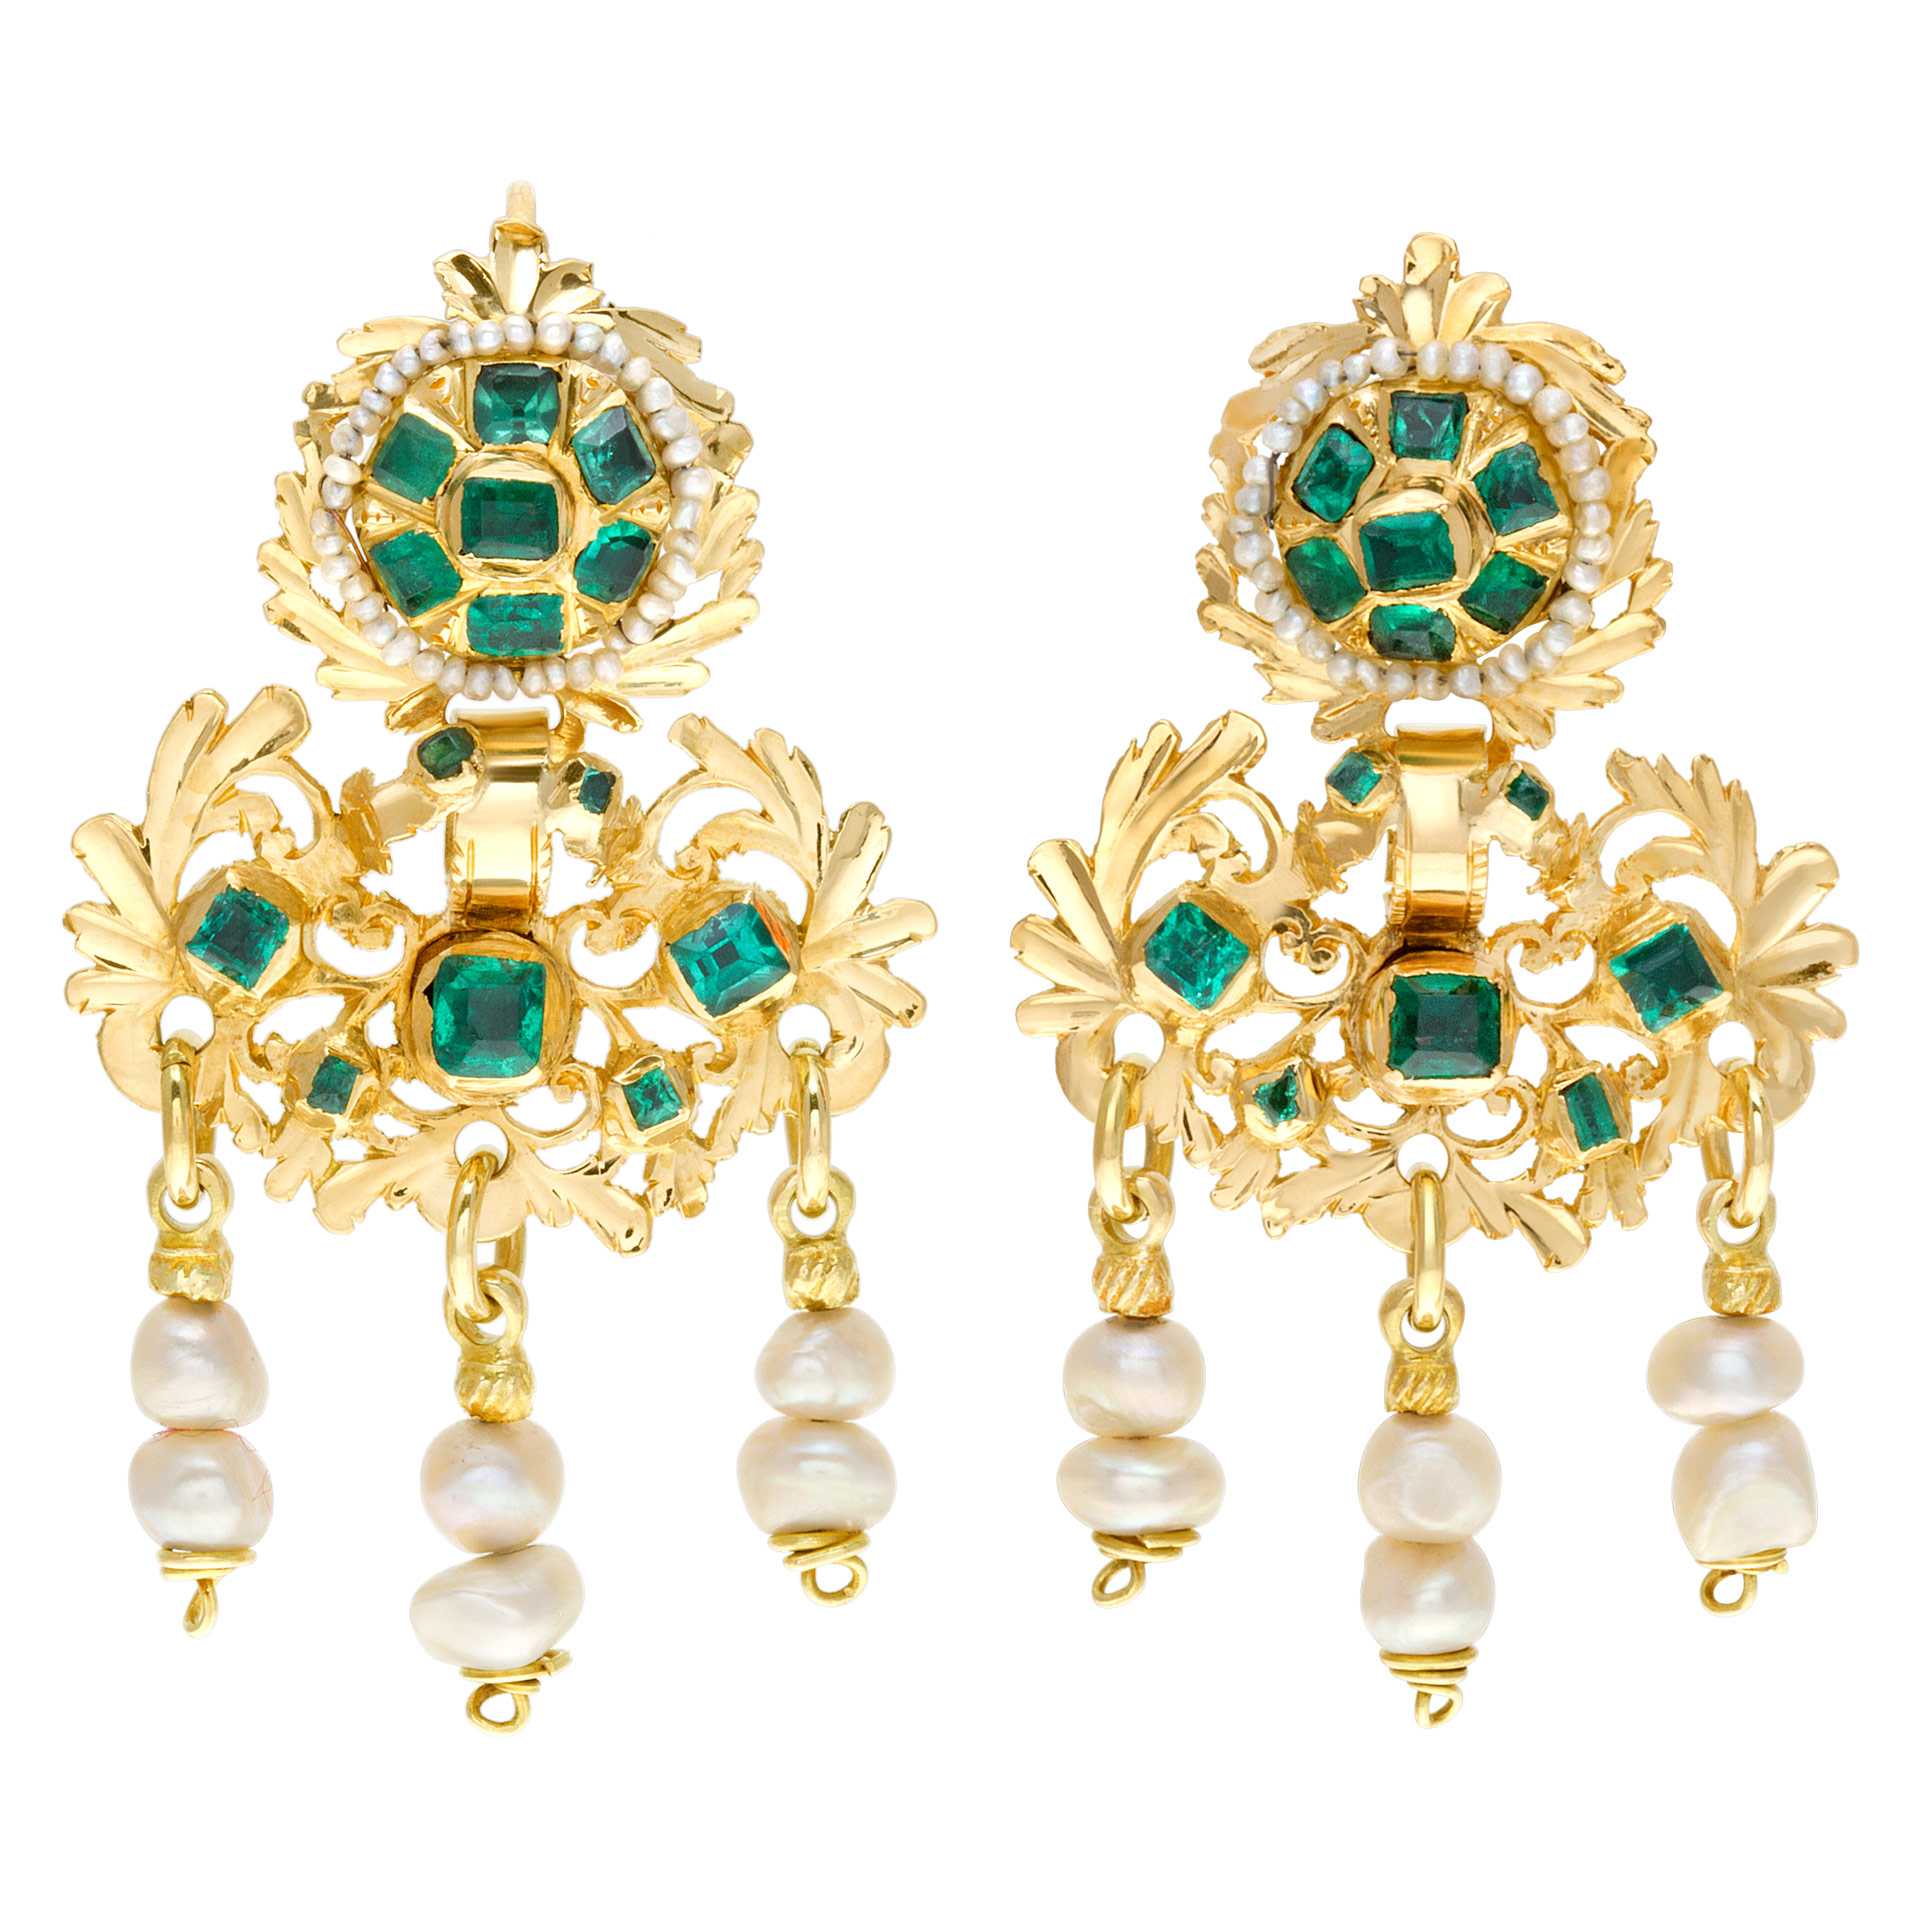 Dangling earrings with natural seed pearls and Columbian emeralds in 18k image 1